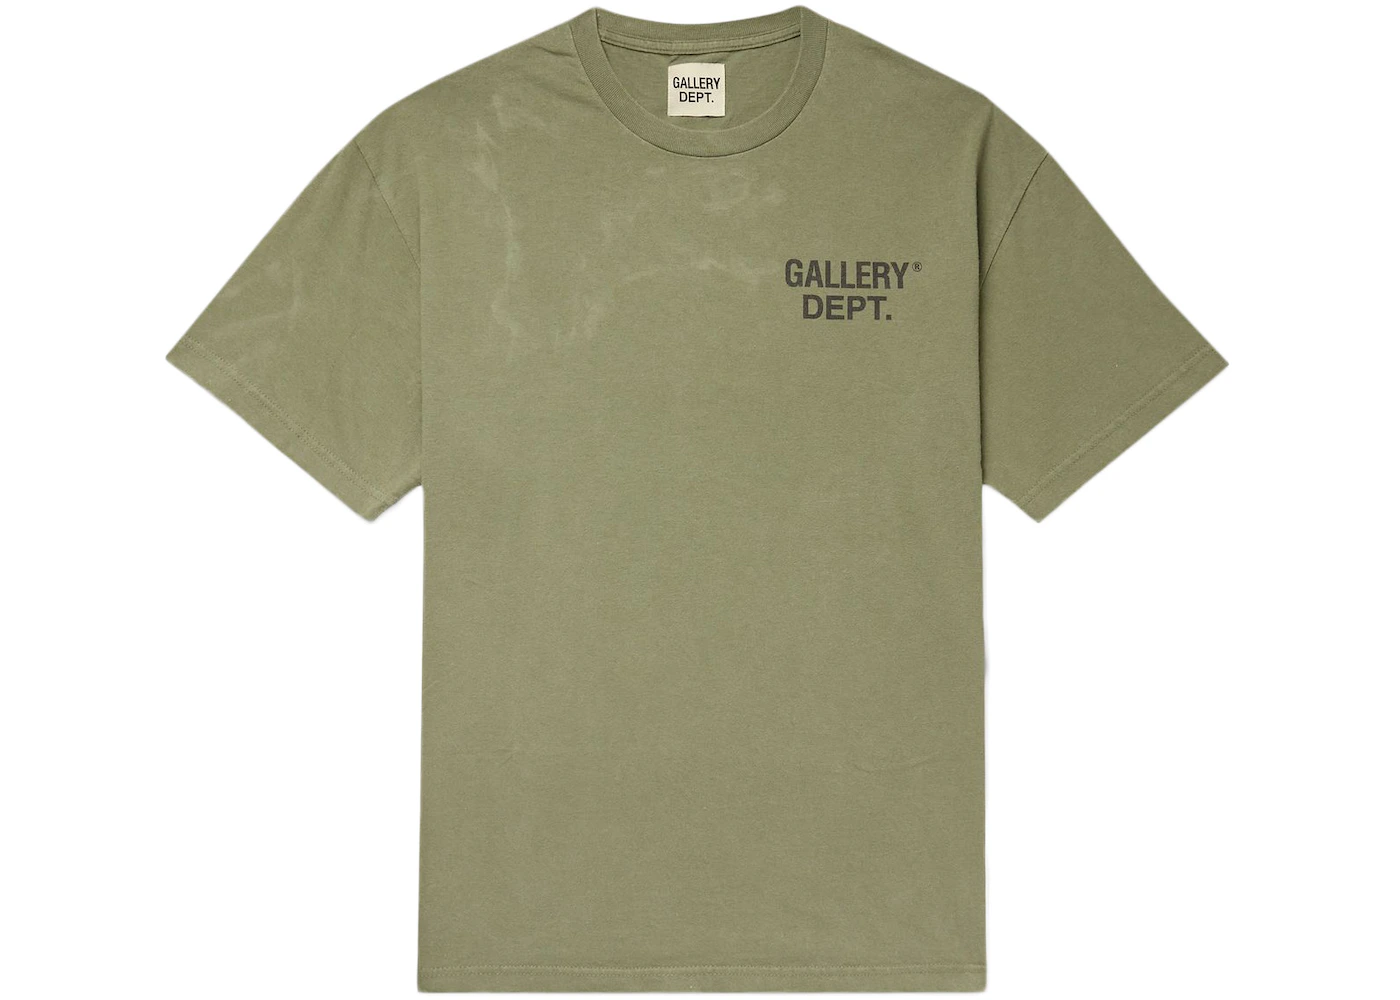 Gallery Dept Shirts: Distinctive Style Redefined